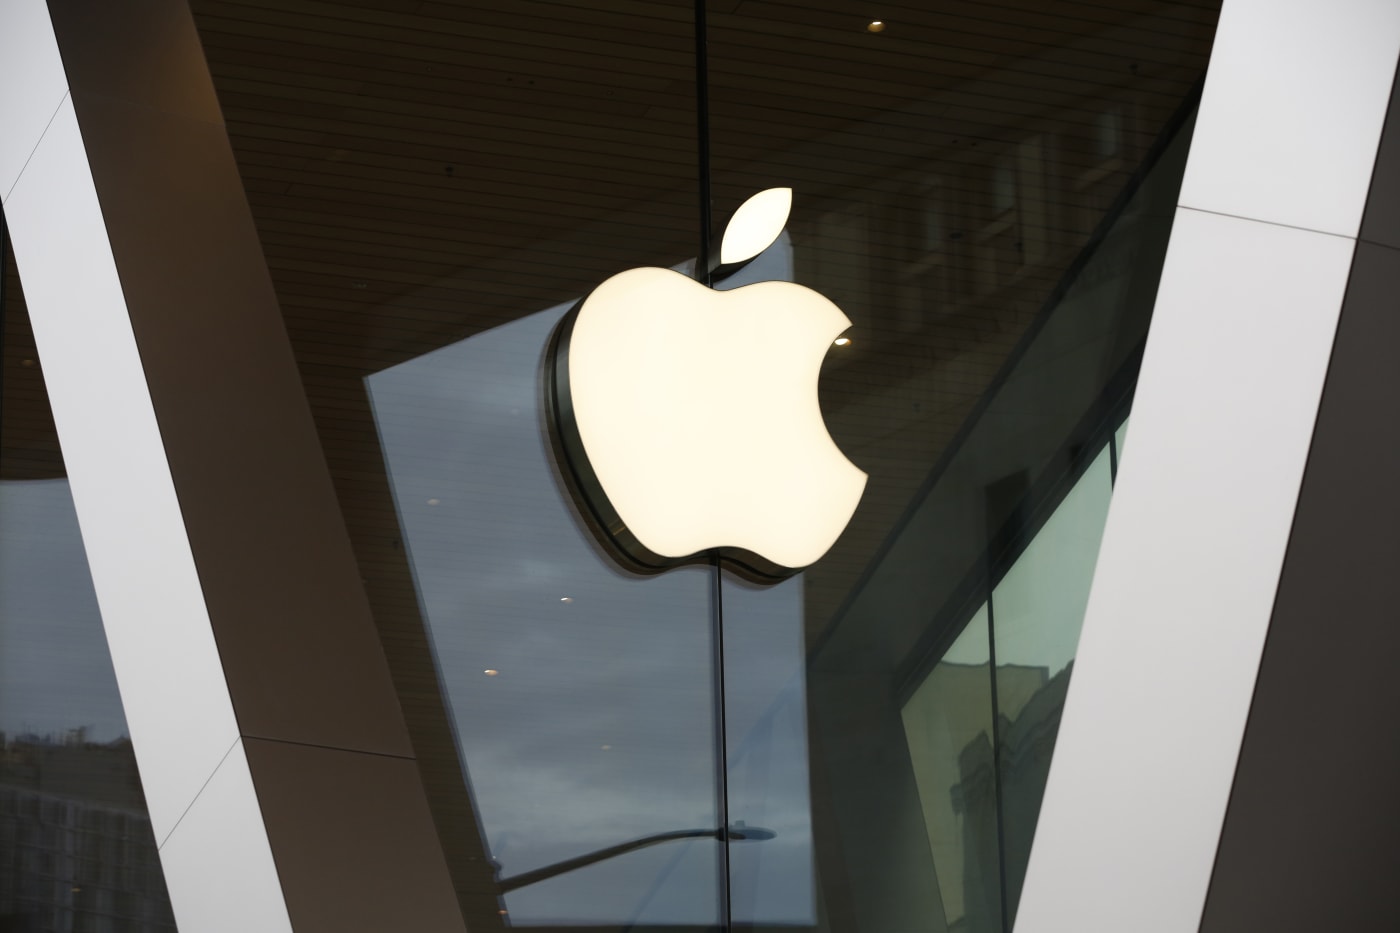 Apple may face a mammoth fine after the EU said it violated competition rules